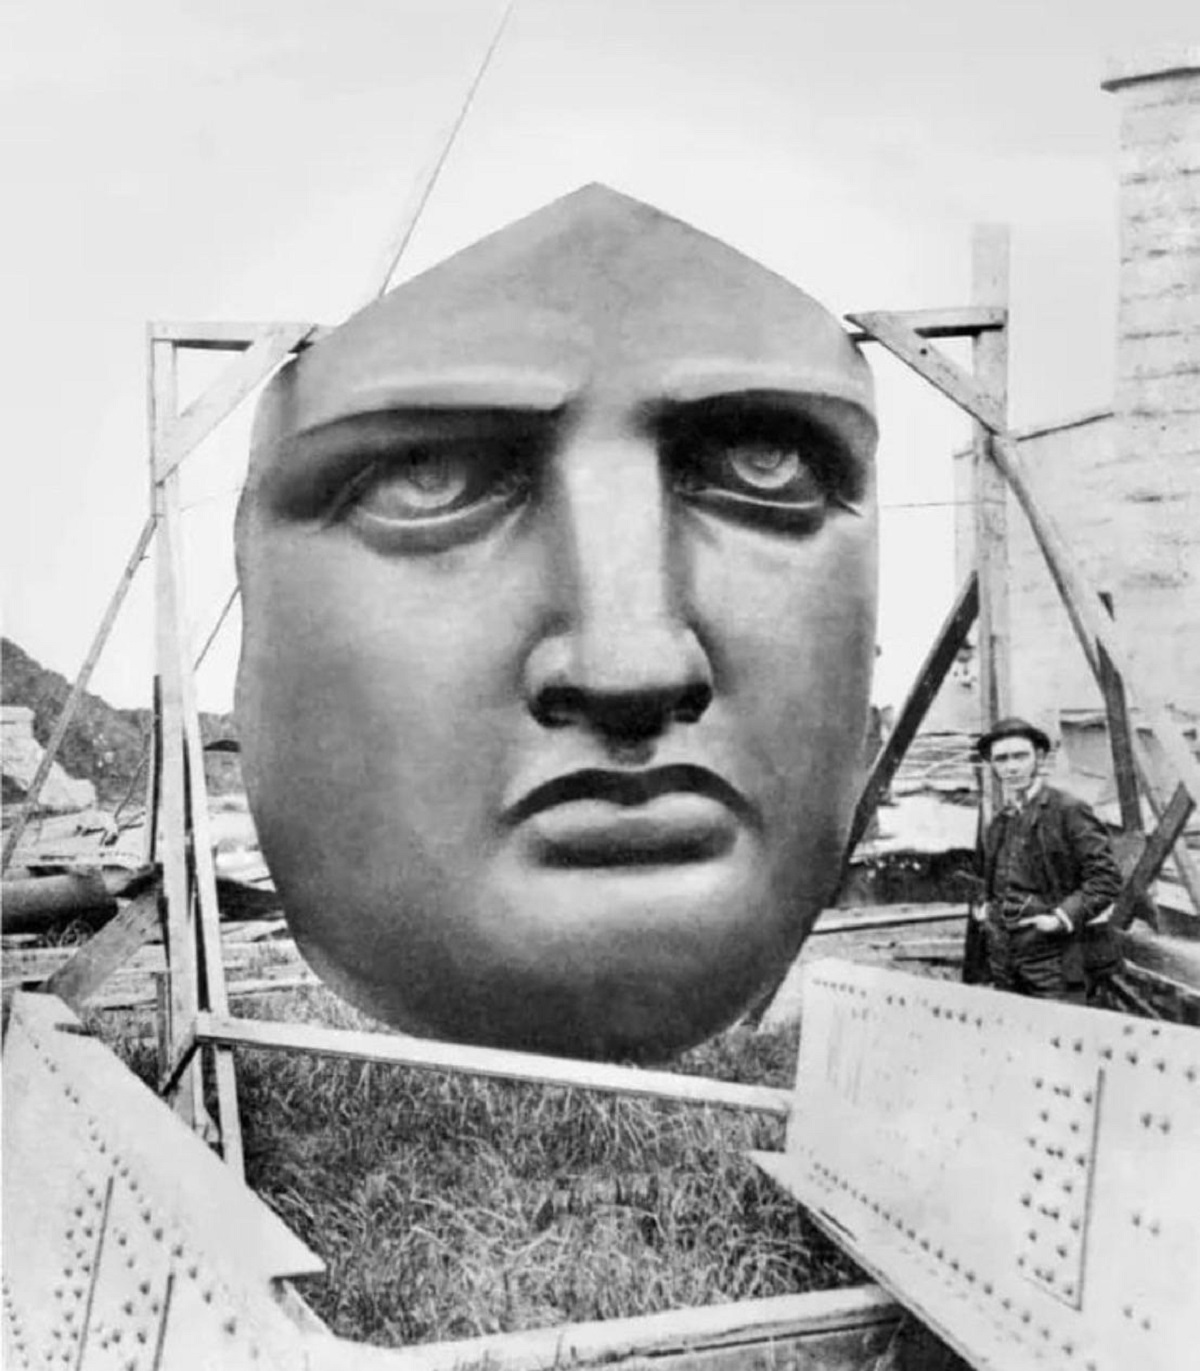 The face of the Statue of Liberty before being attached.